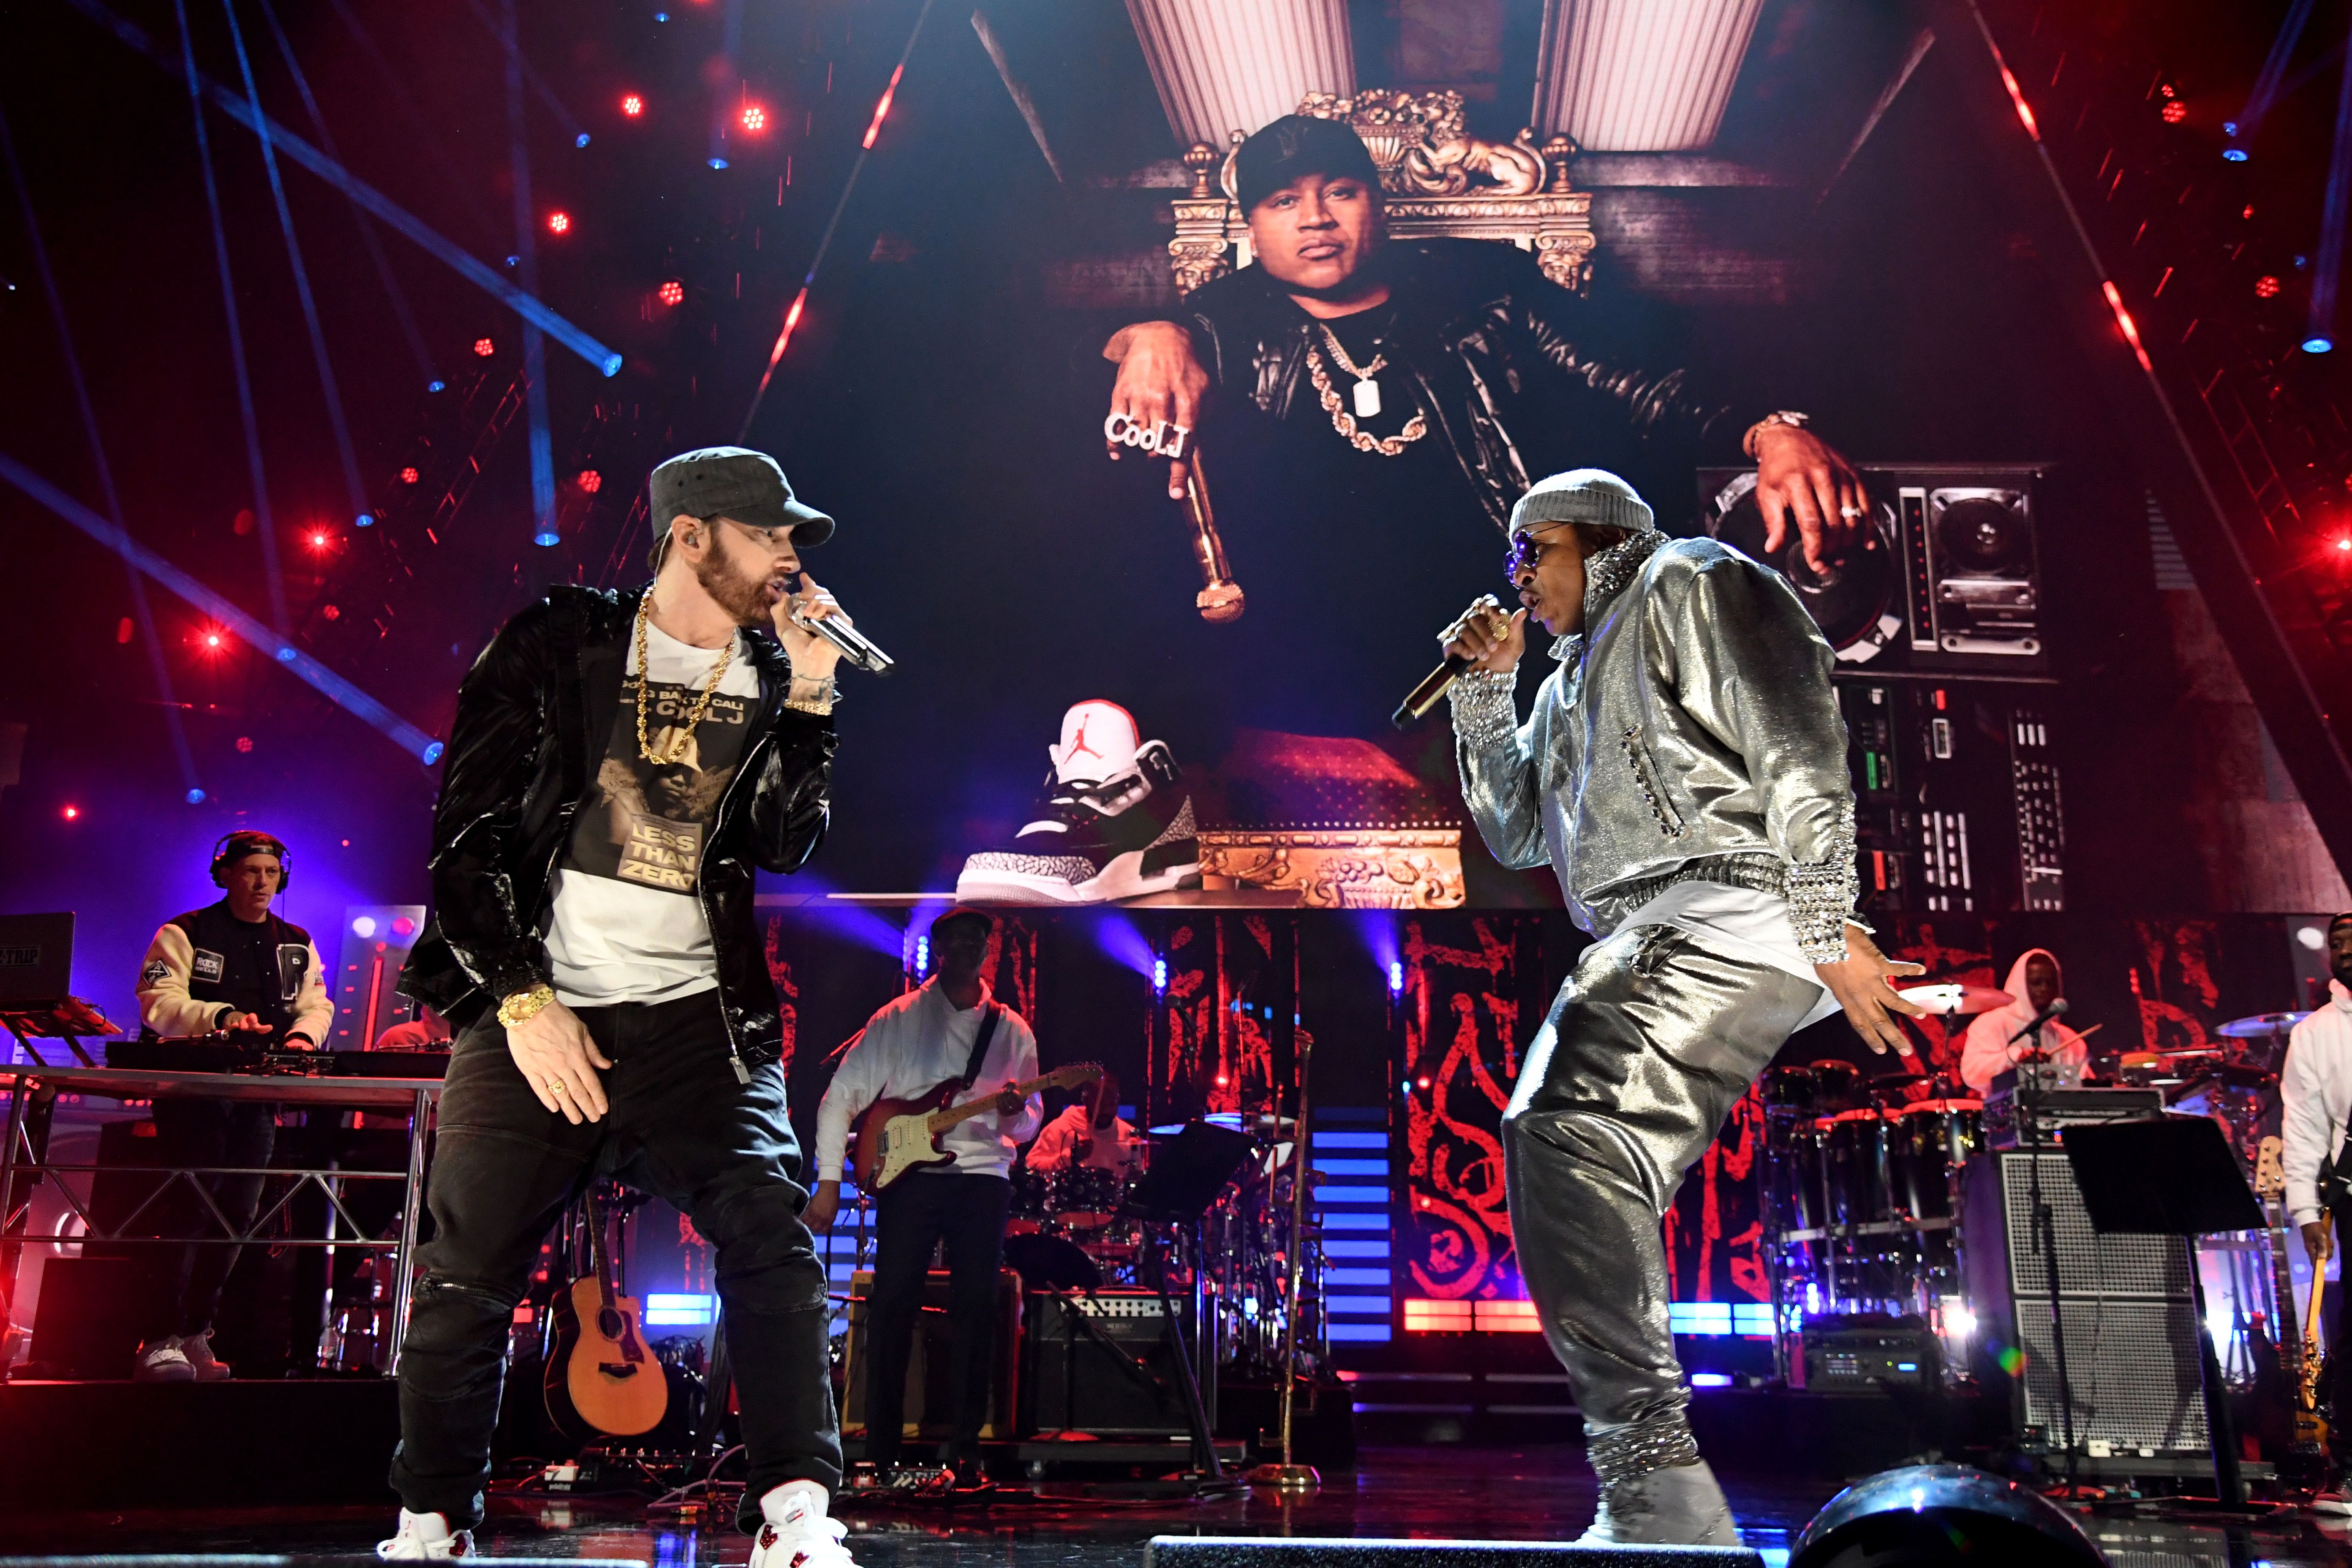 Eminem and LL Cool J perform on stage together. 